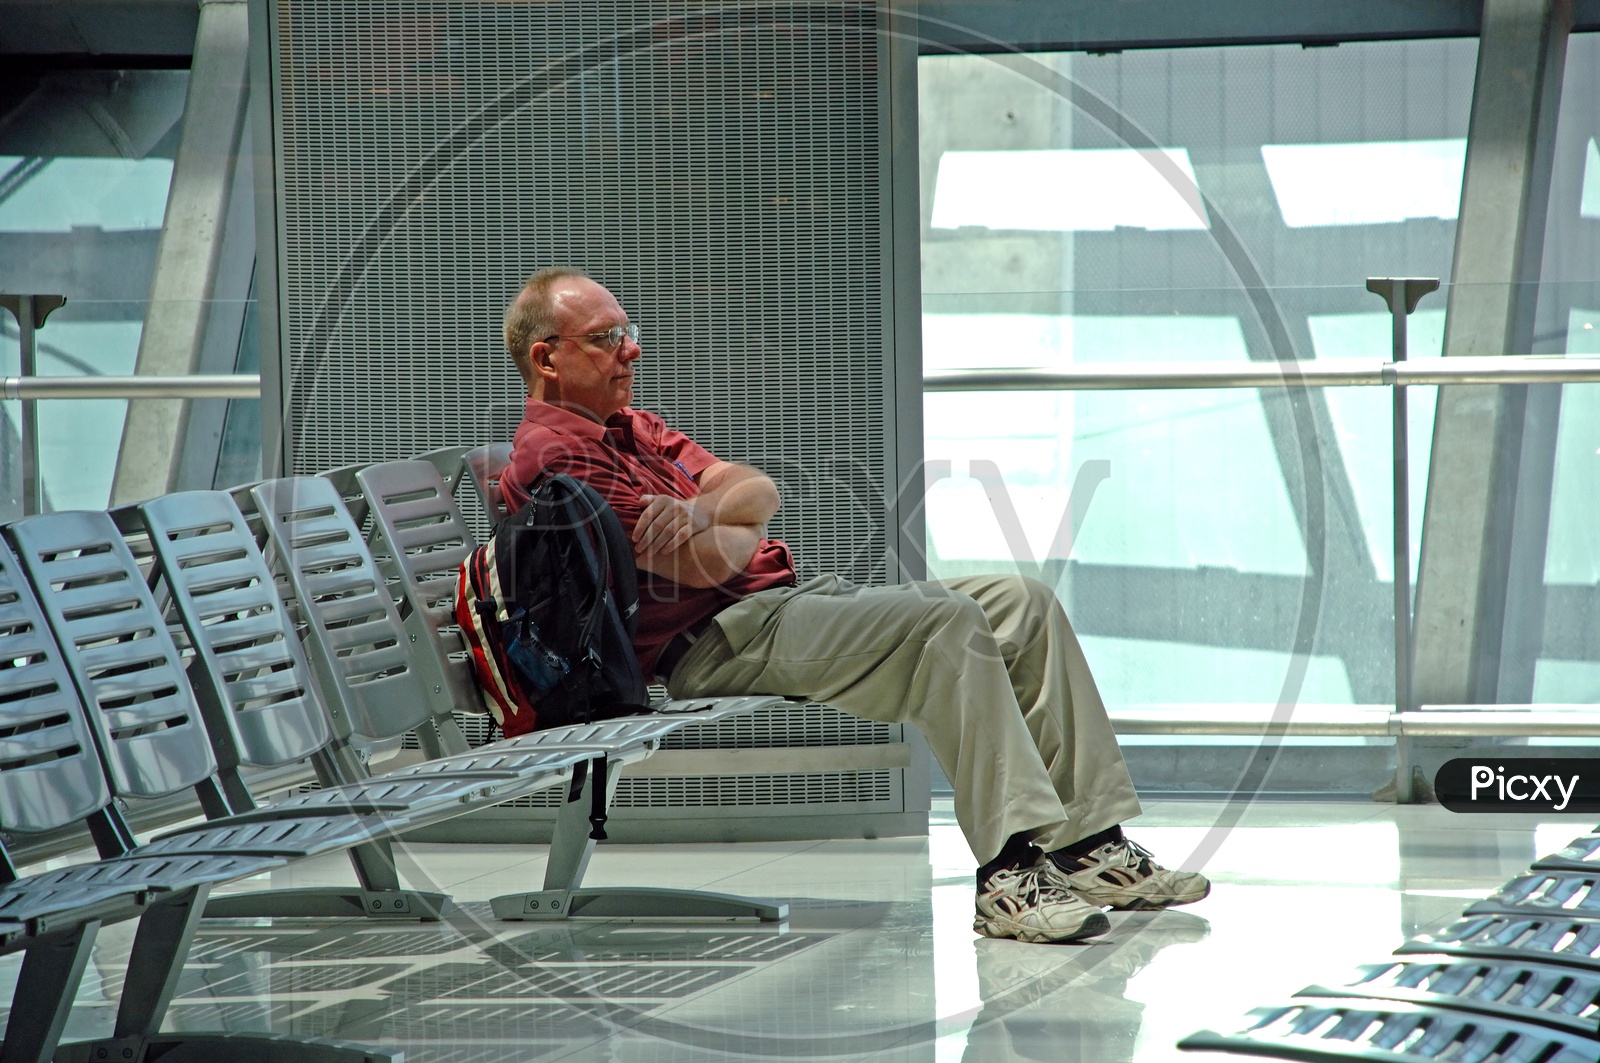 A  Tired Man  Sitting  on a Chair And Sleeping in airport